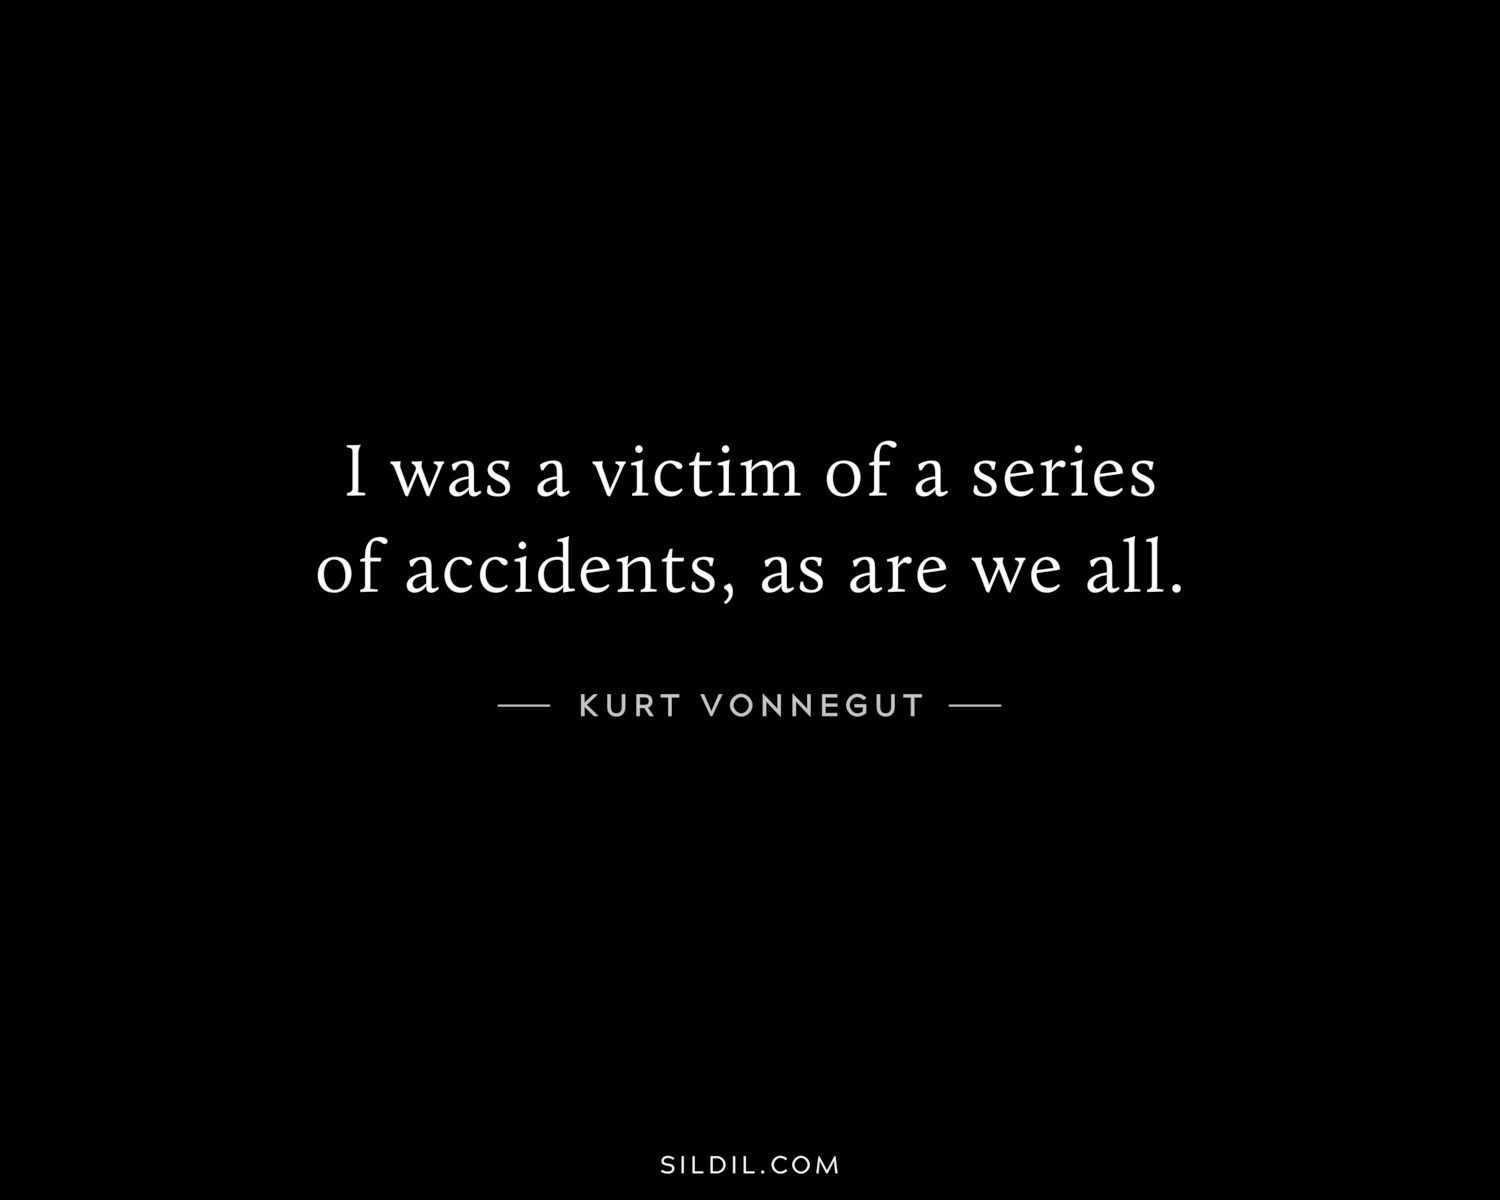 I was a victim of a series of accidents, as are we all.